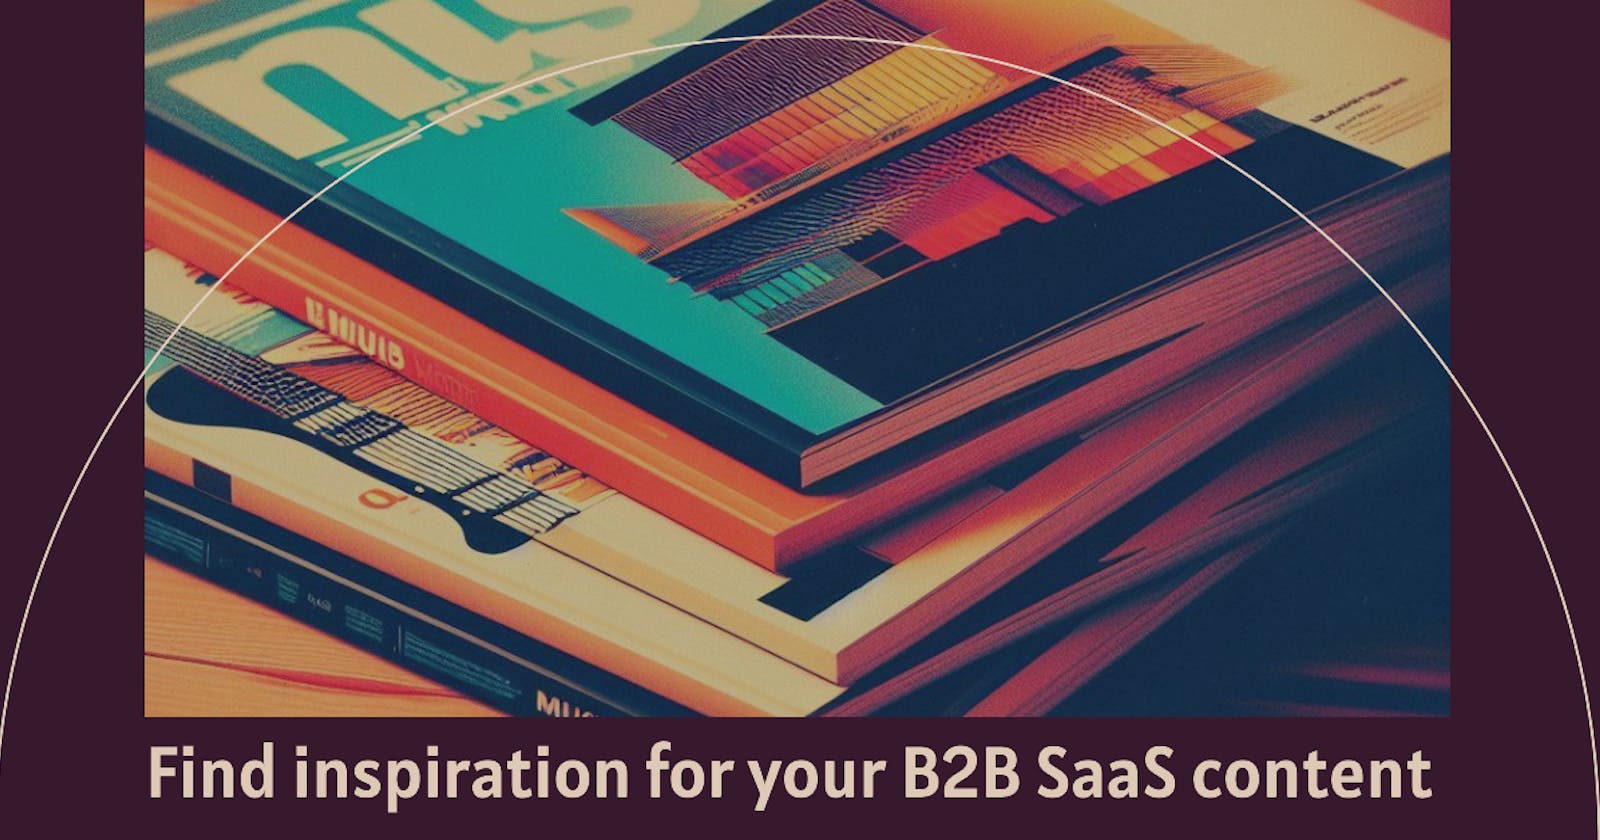 Look beyond tech to inspire your B2B SaaS content